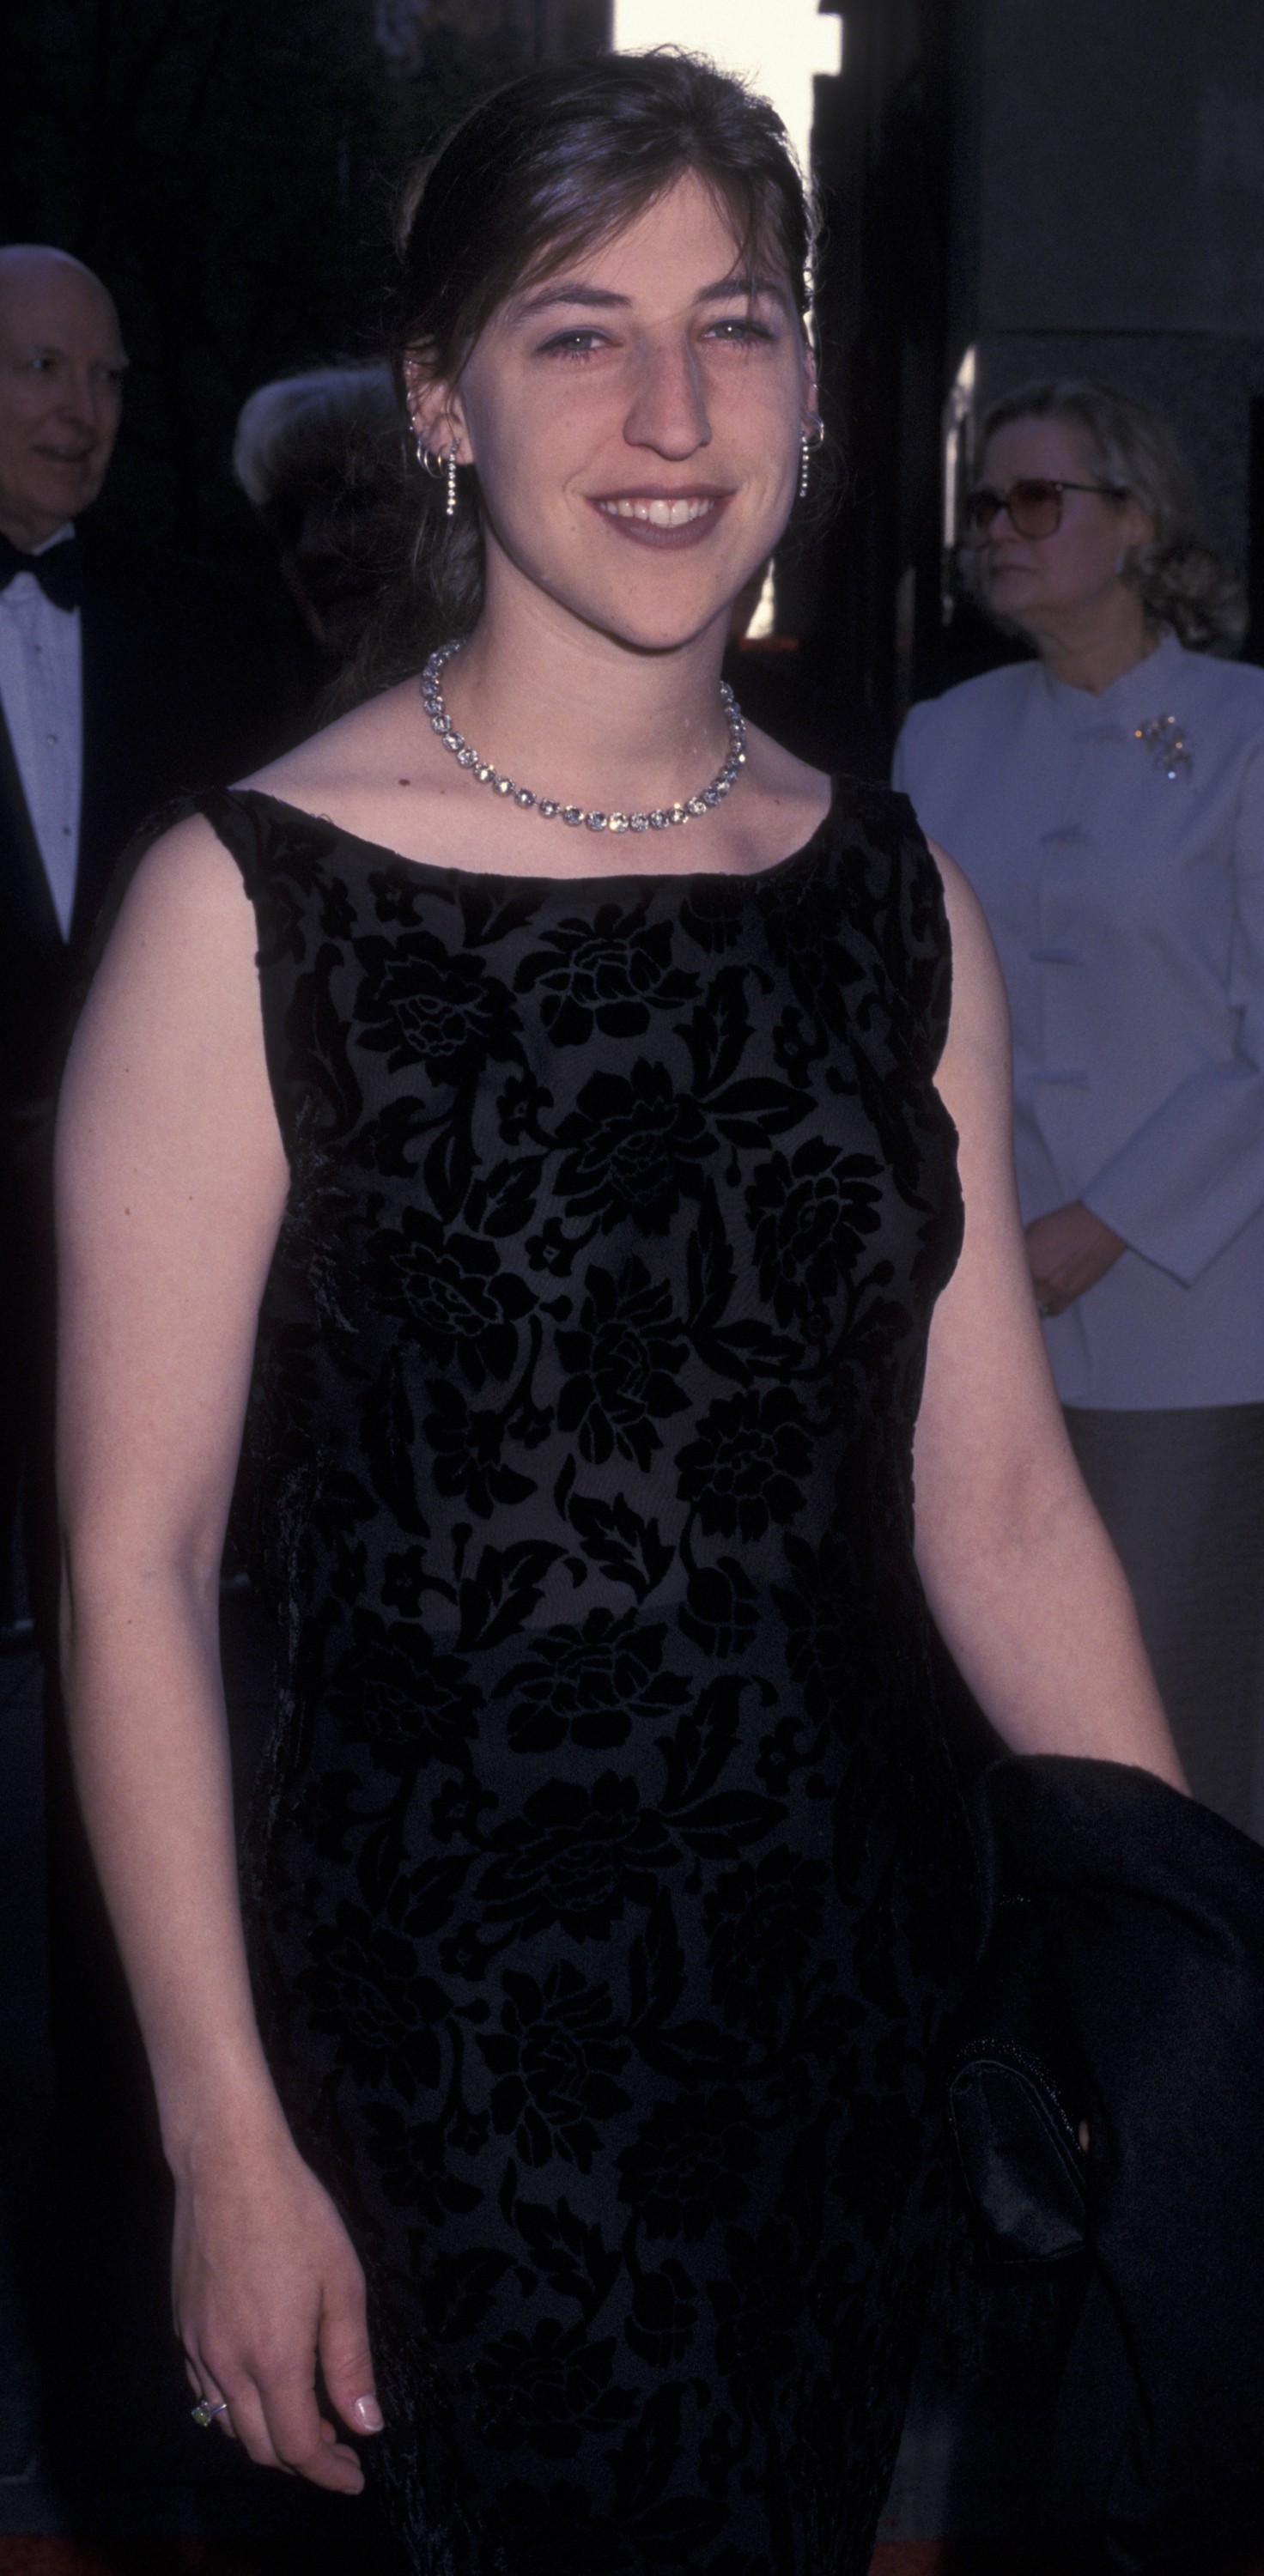 Mayim Bialik attends the taping of "NBC 75th Anniversary Celebration" in New York City, on May 5, 2002. | Source: Getty Images